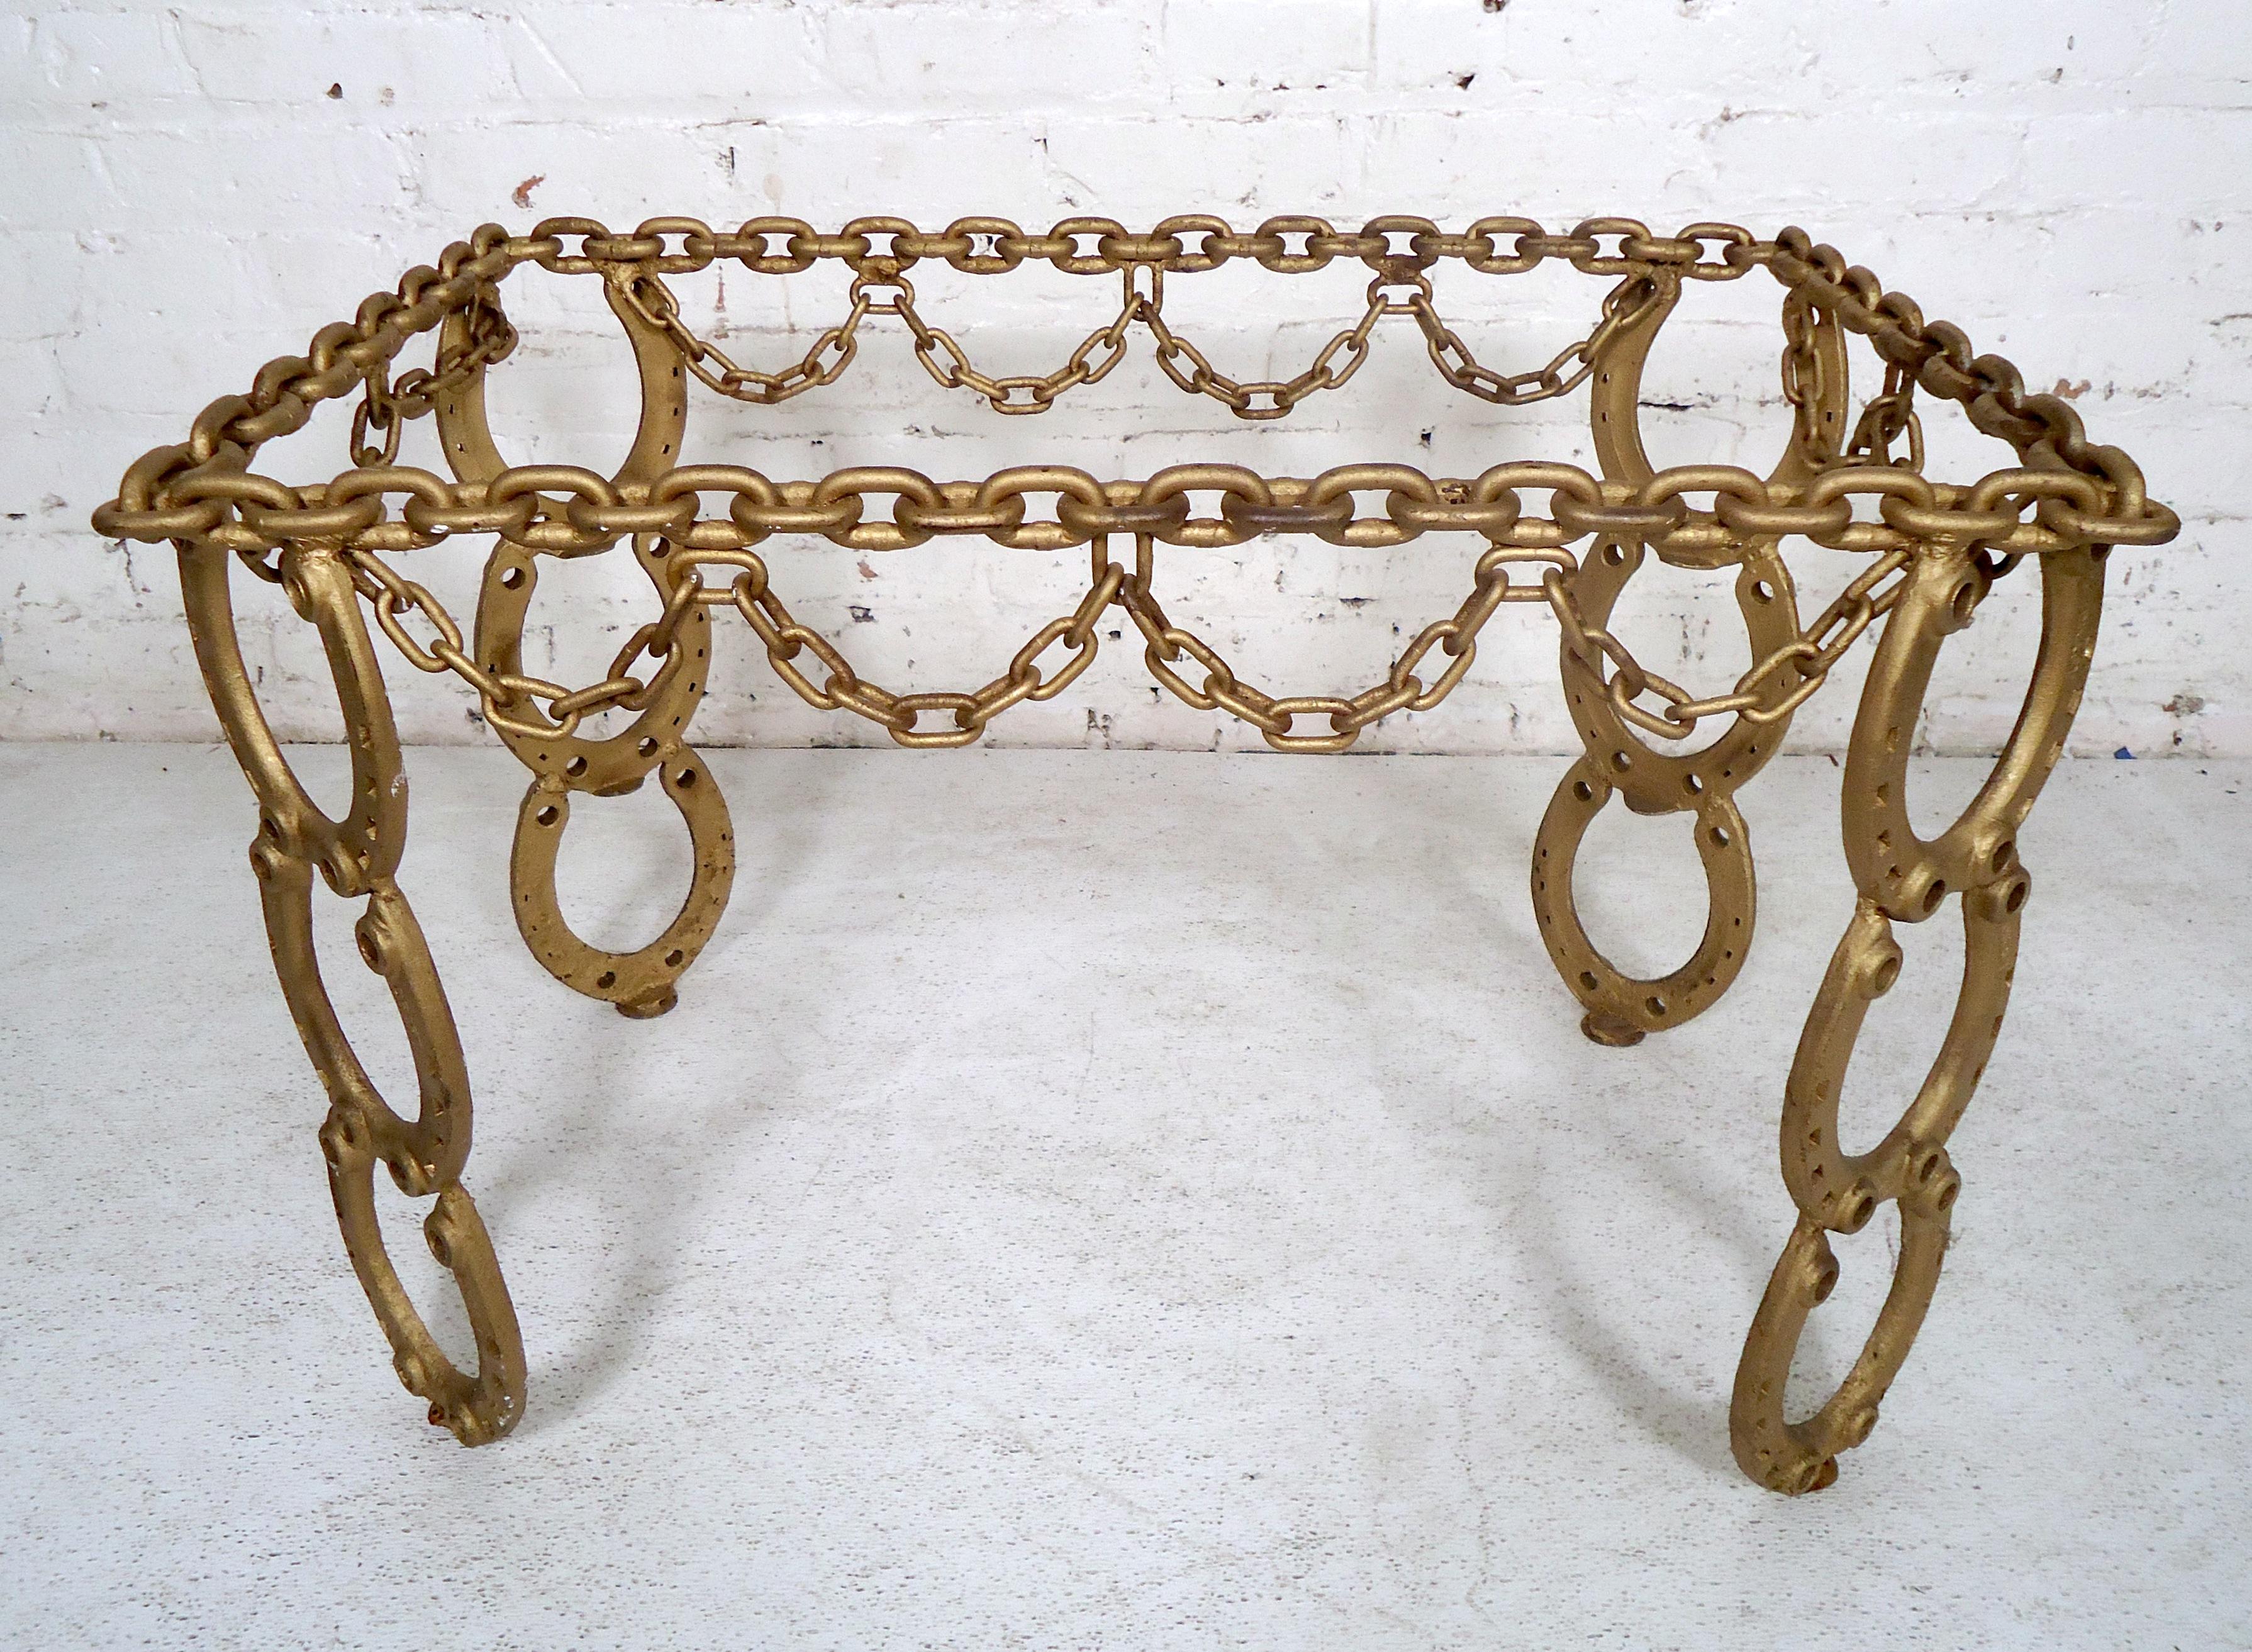 Uniquely designed vintage iron side table featuring a chain top and horseshoe legs.

(Please confirm item location - NY or NJ - with dealer).